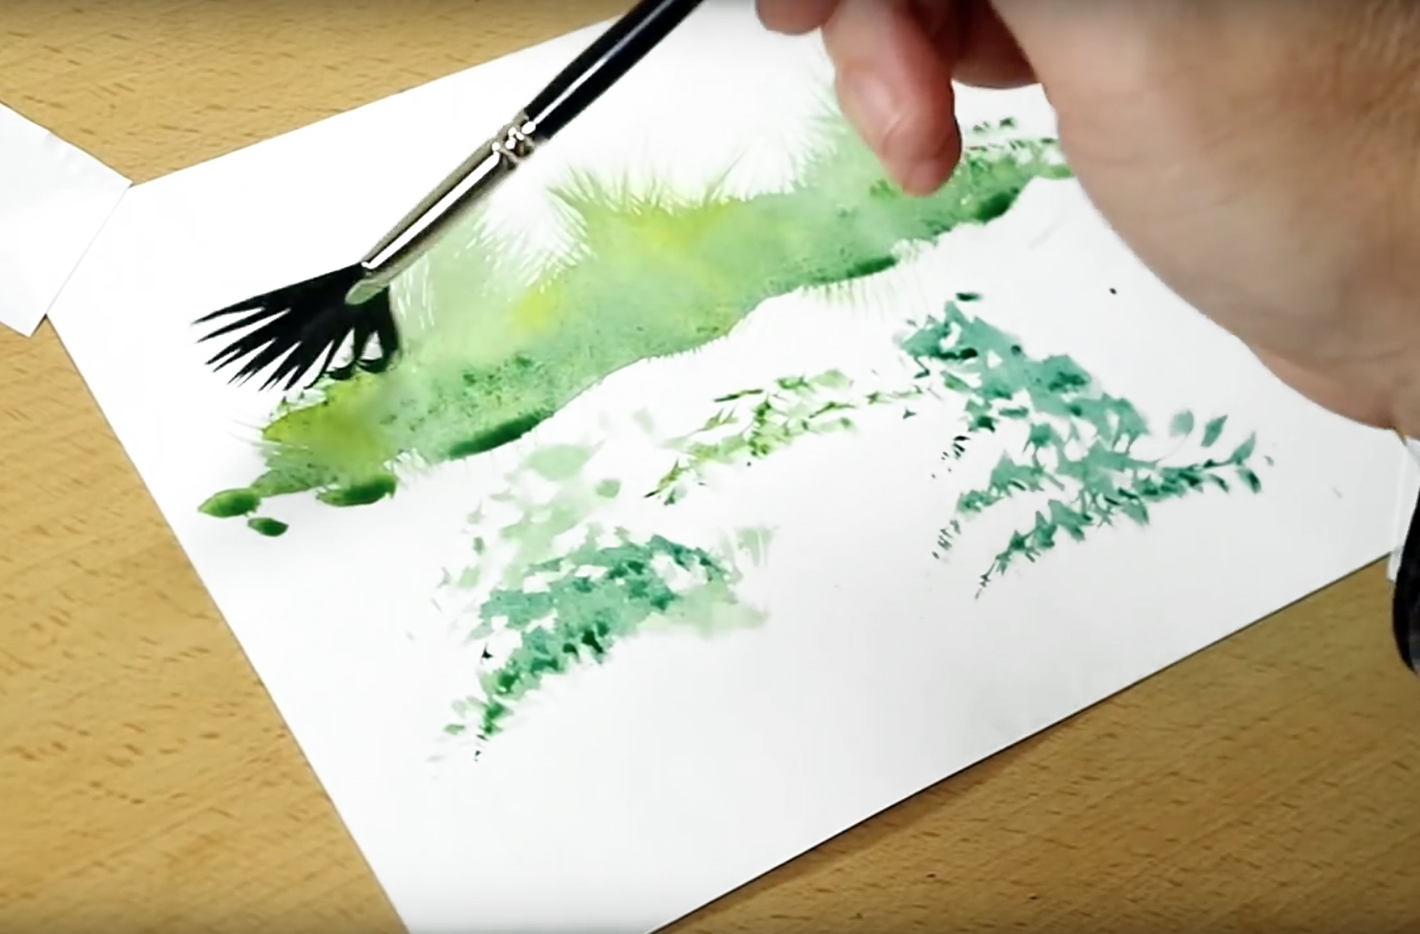 4 Watercolor Techniques For Painting With A Fan Brush - Beebly's Watercolor  Painting